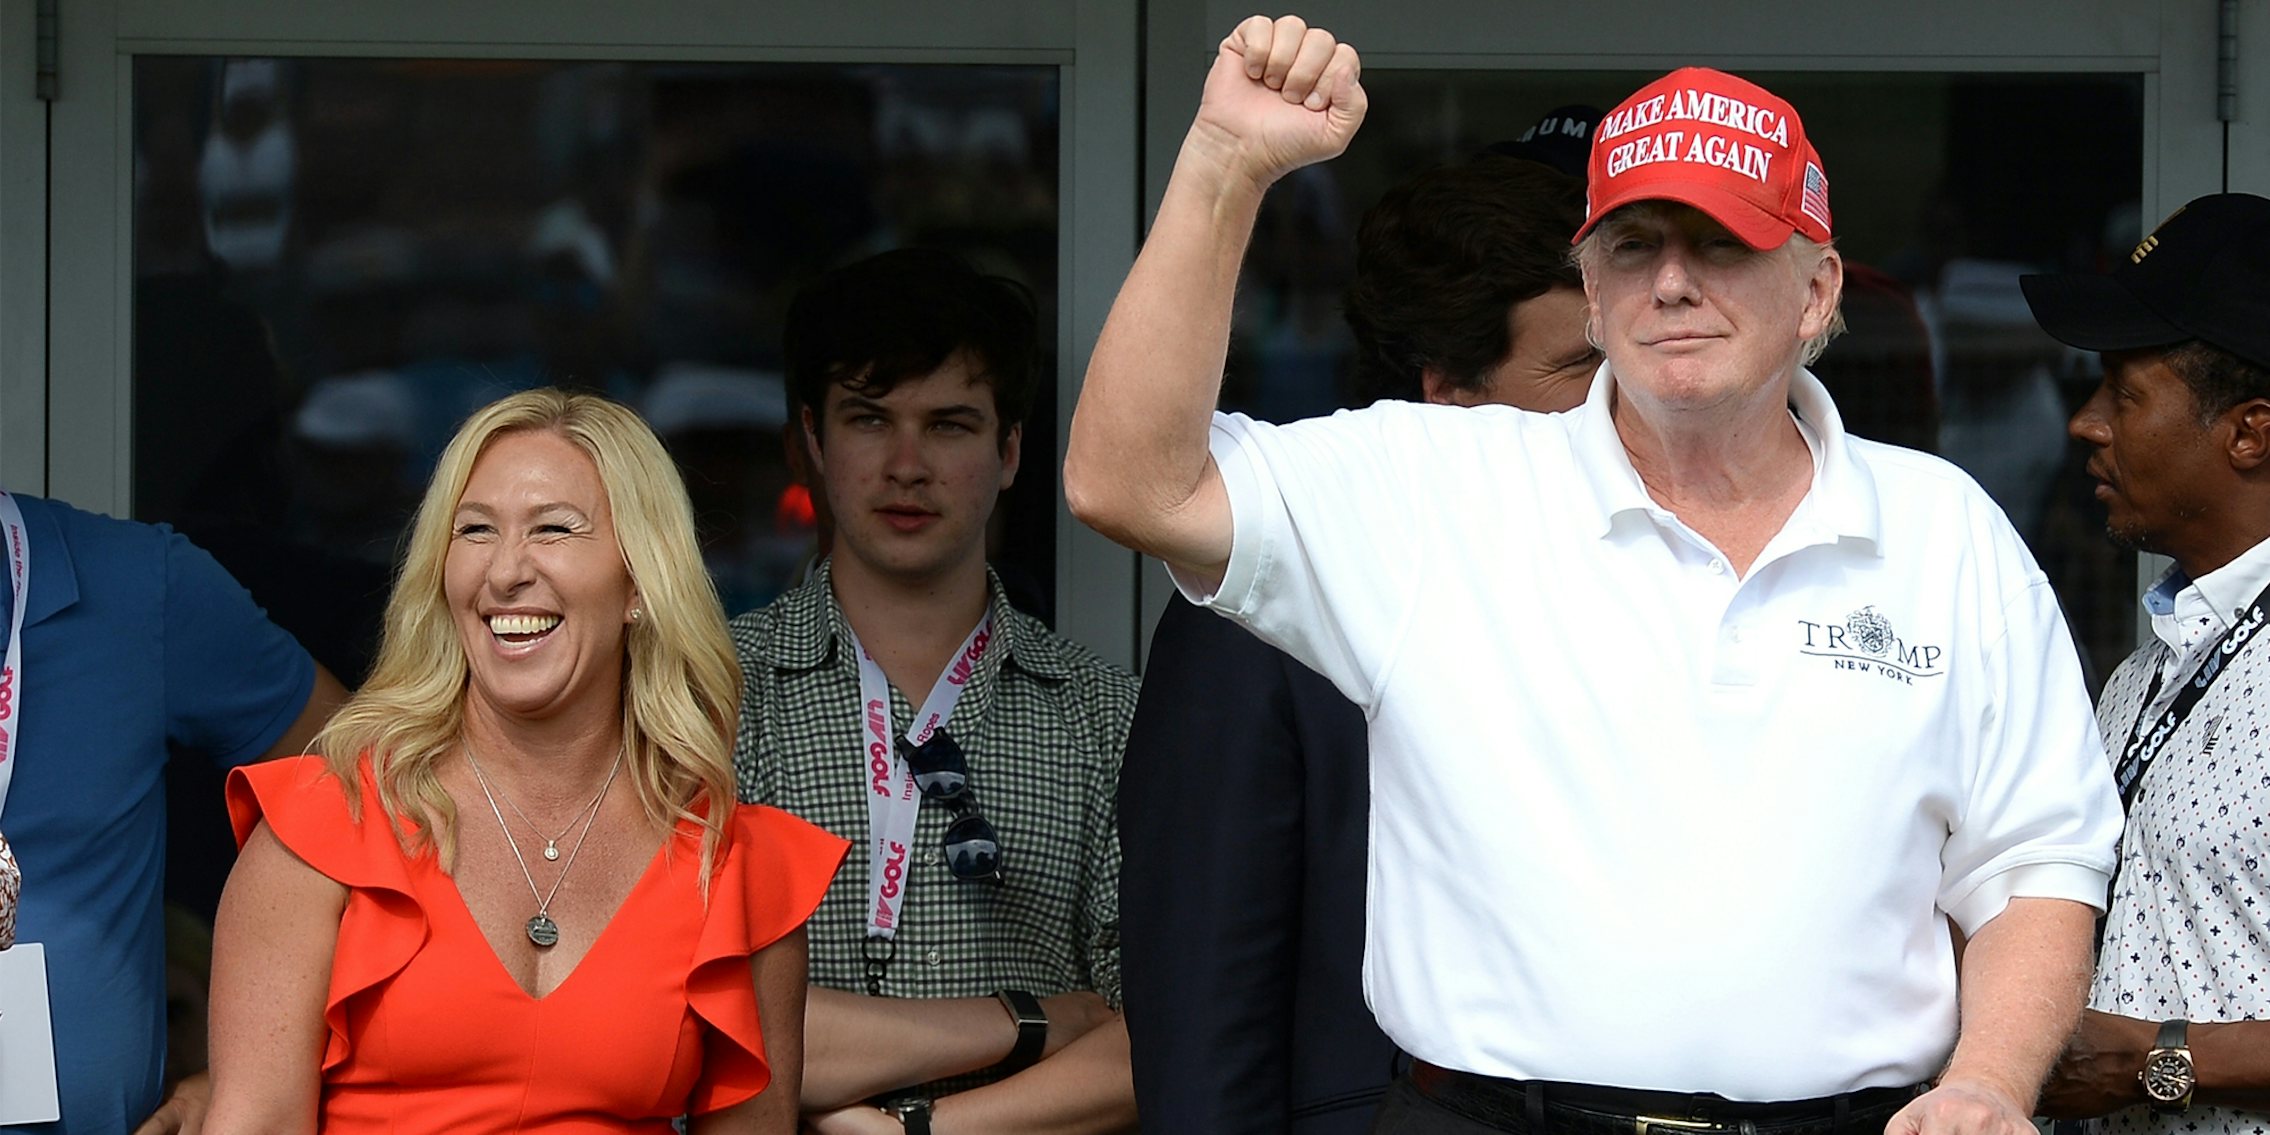 BEDMINSTER,NJ-JULY 31,2022: Marjorie Taylor Greene (L) with Former President Trump react to the golf fans at the 16th Hole during the LIV Tournament held at Trump National Golf Club in Bedminster,NJ.